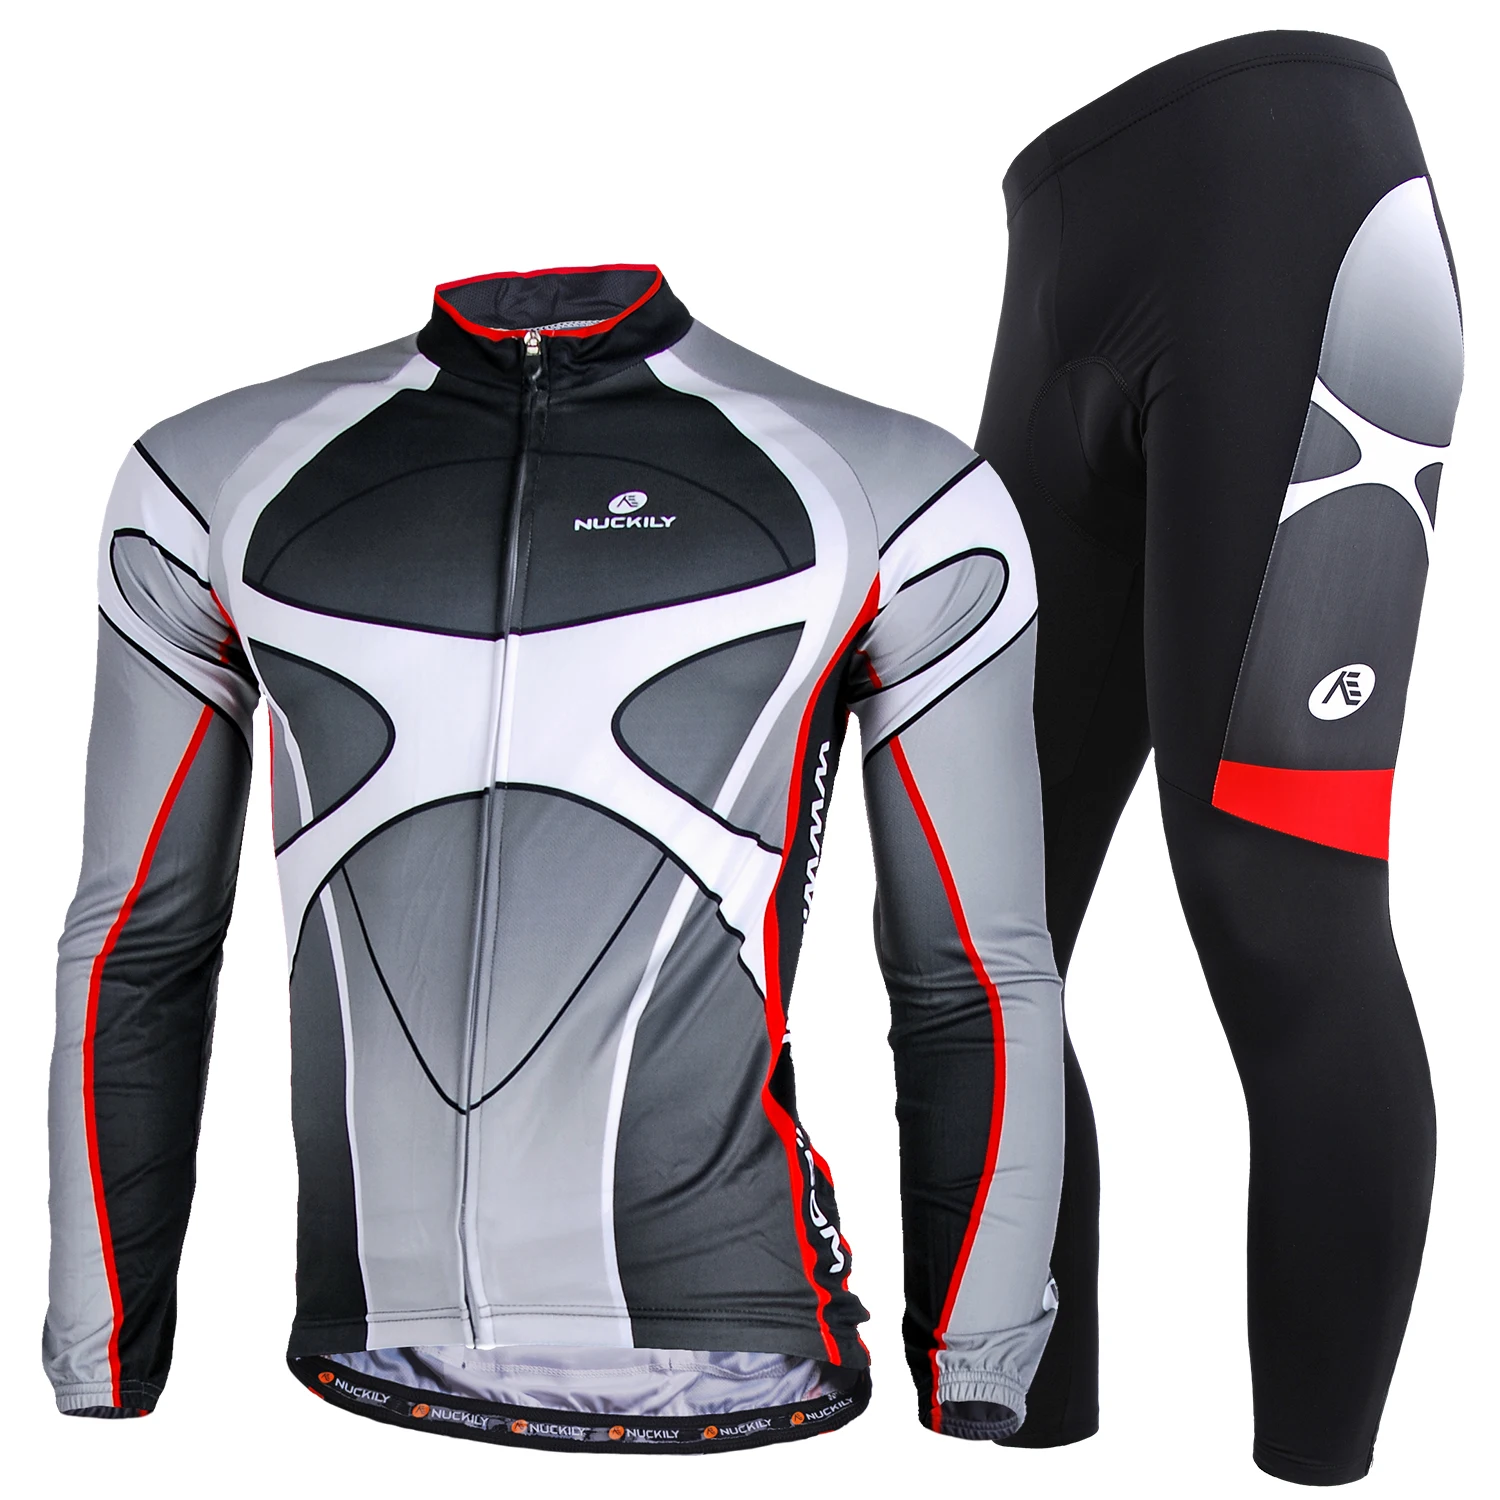 

NUCKILY Men's summer spring autumn breathable long sleeve cycling jersey and padded pants sets suit bike riding wear, Black